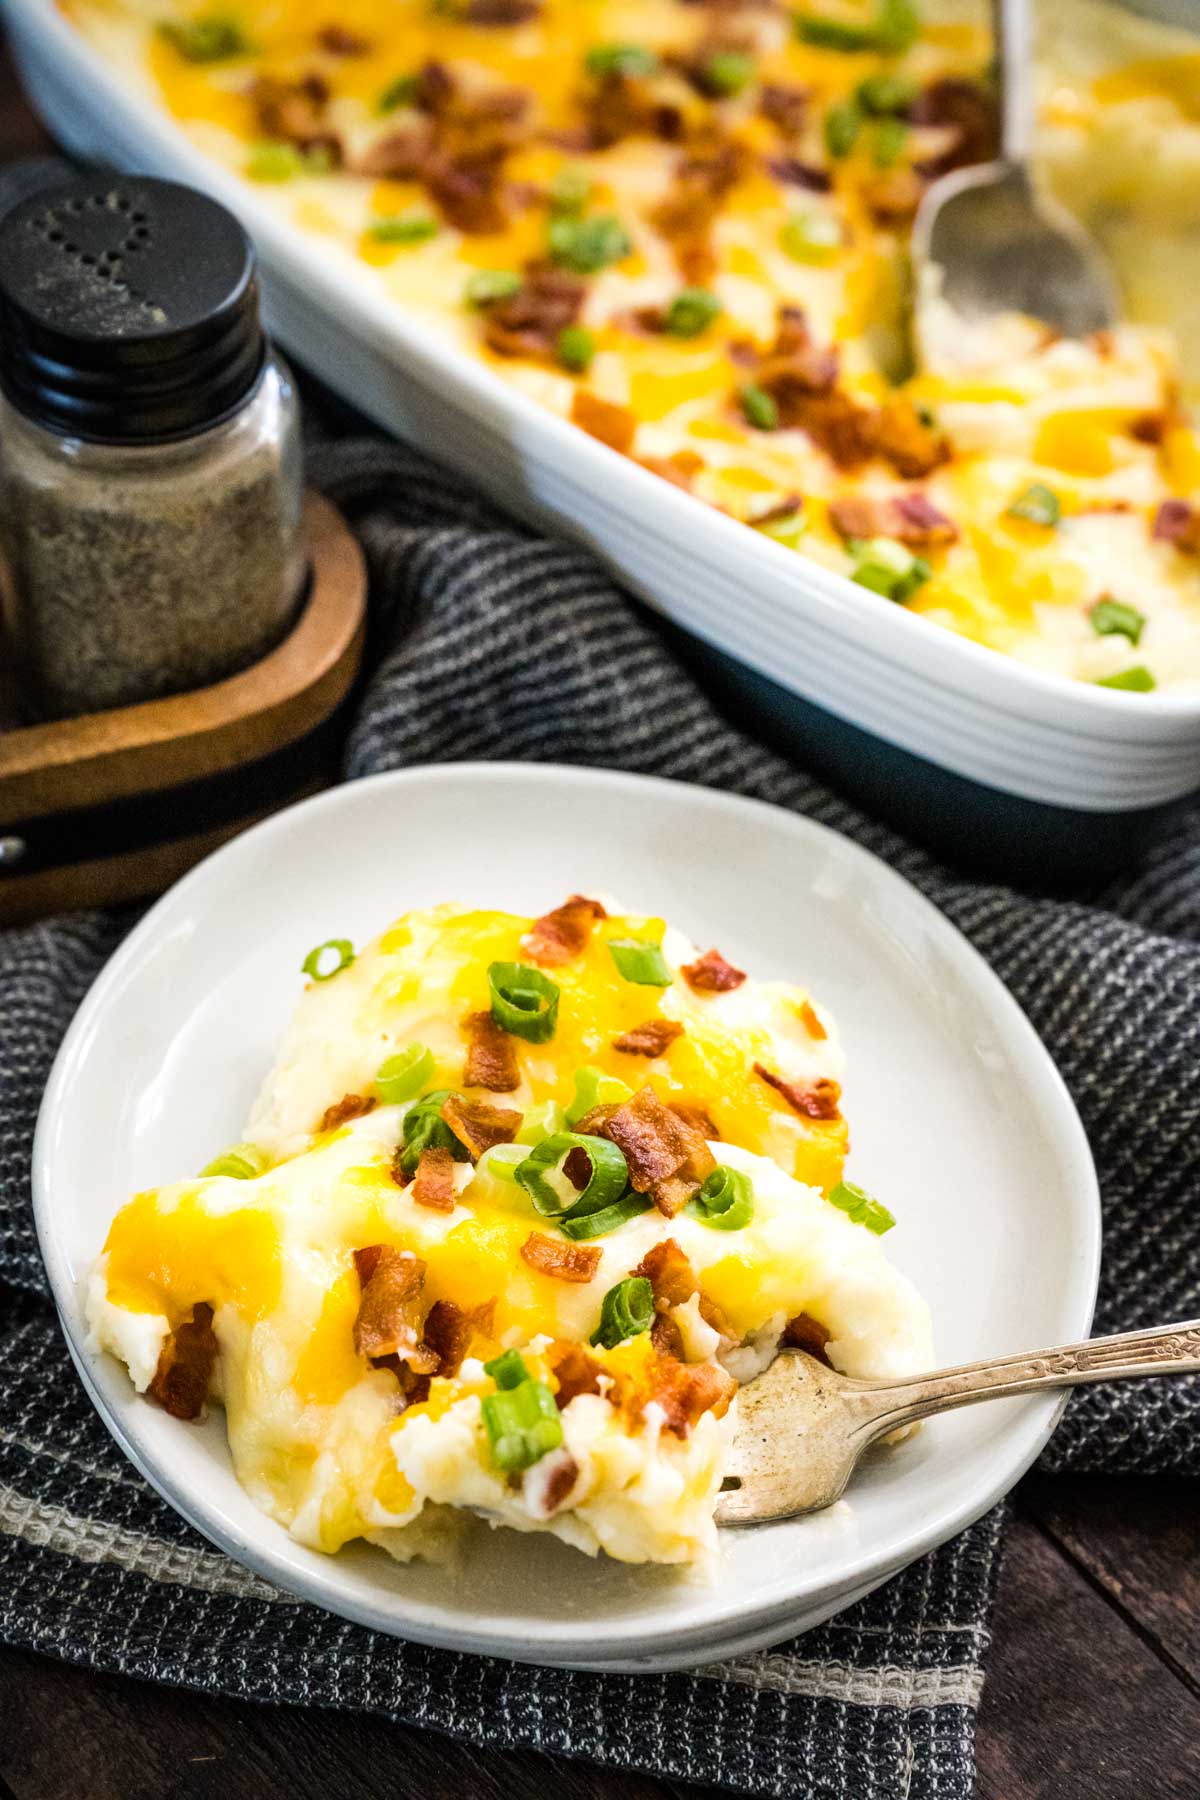 A plate full of creamy loaded mashed potatoes on a wooden table with pepper shaker in the background.